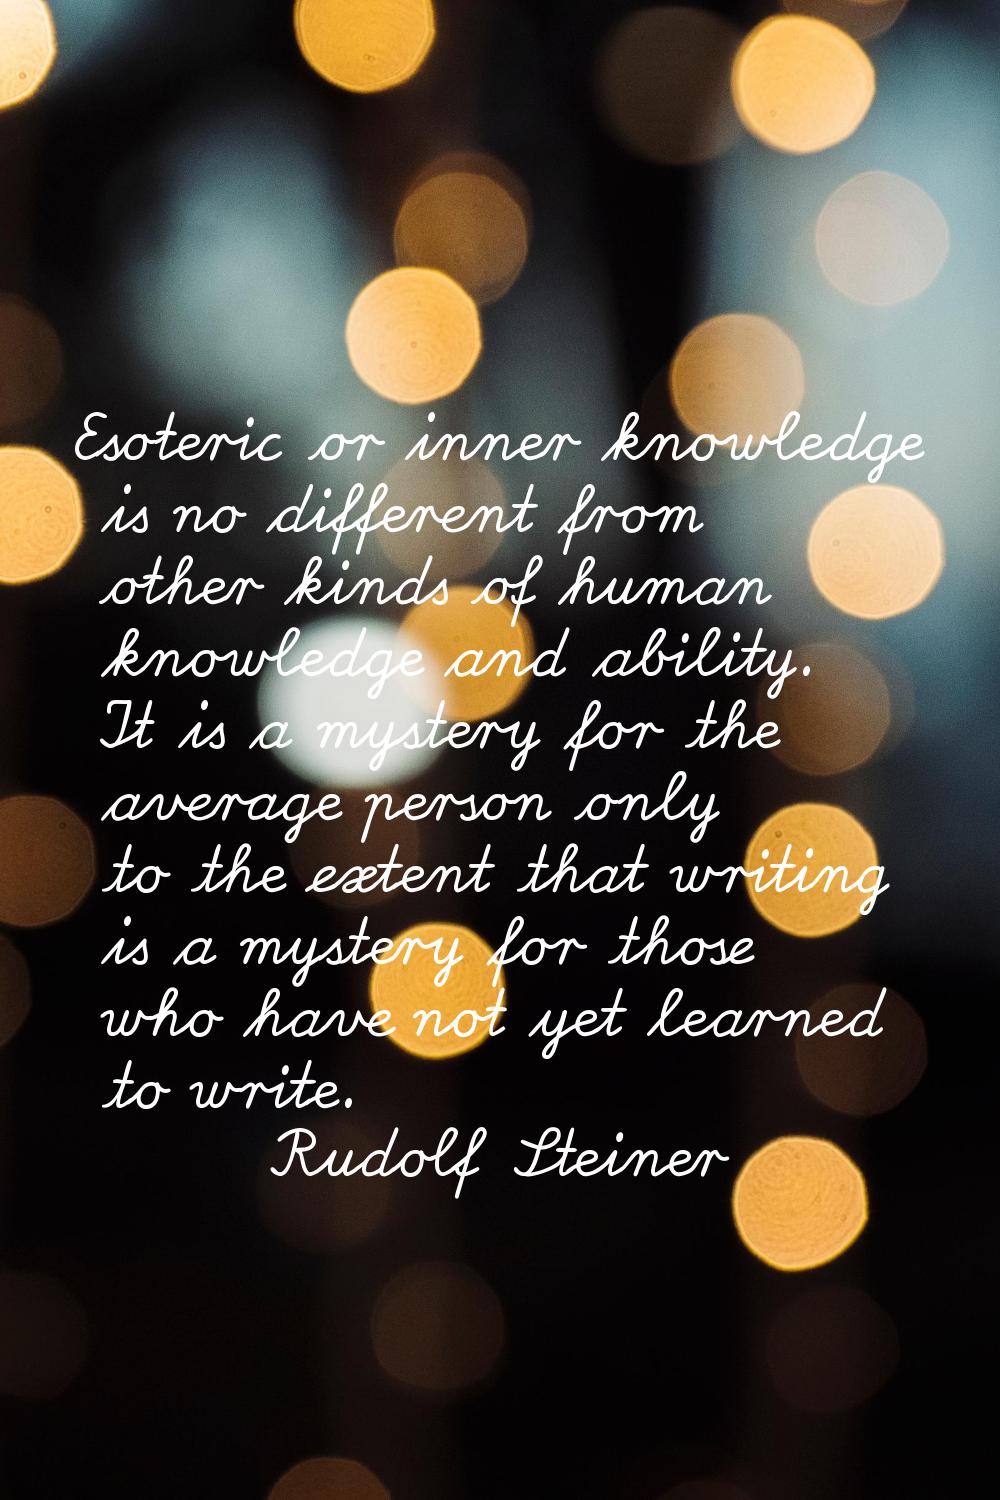 Esoteric or inner knowledge is no different from other kinds of human knowledge and ability. It is 